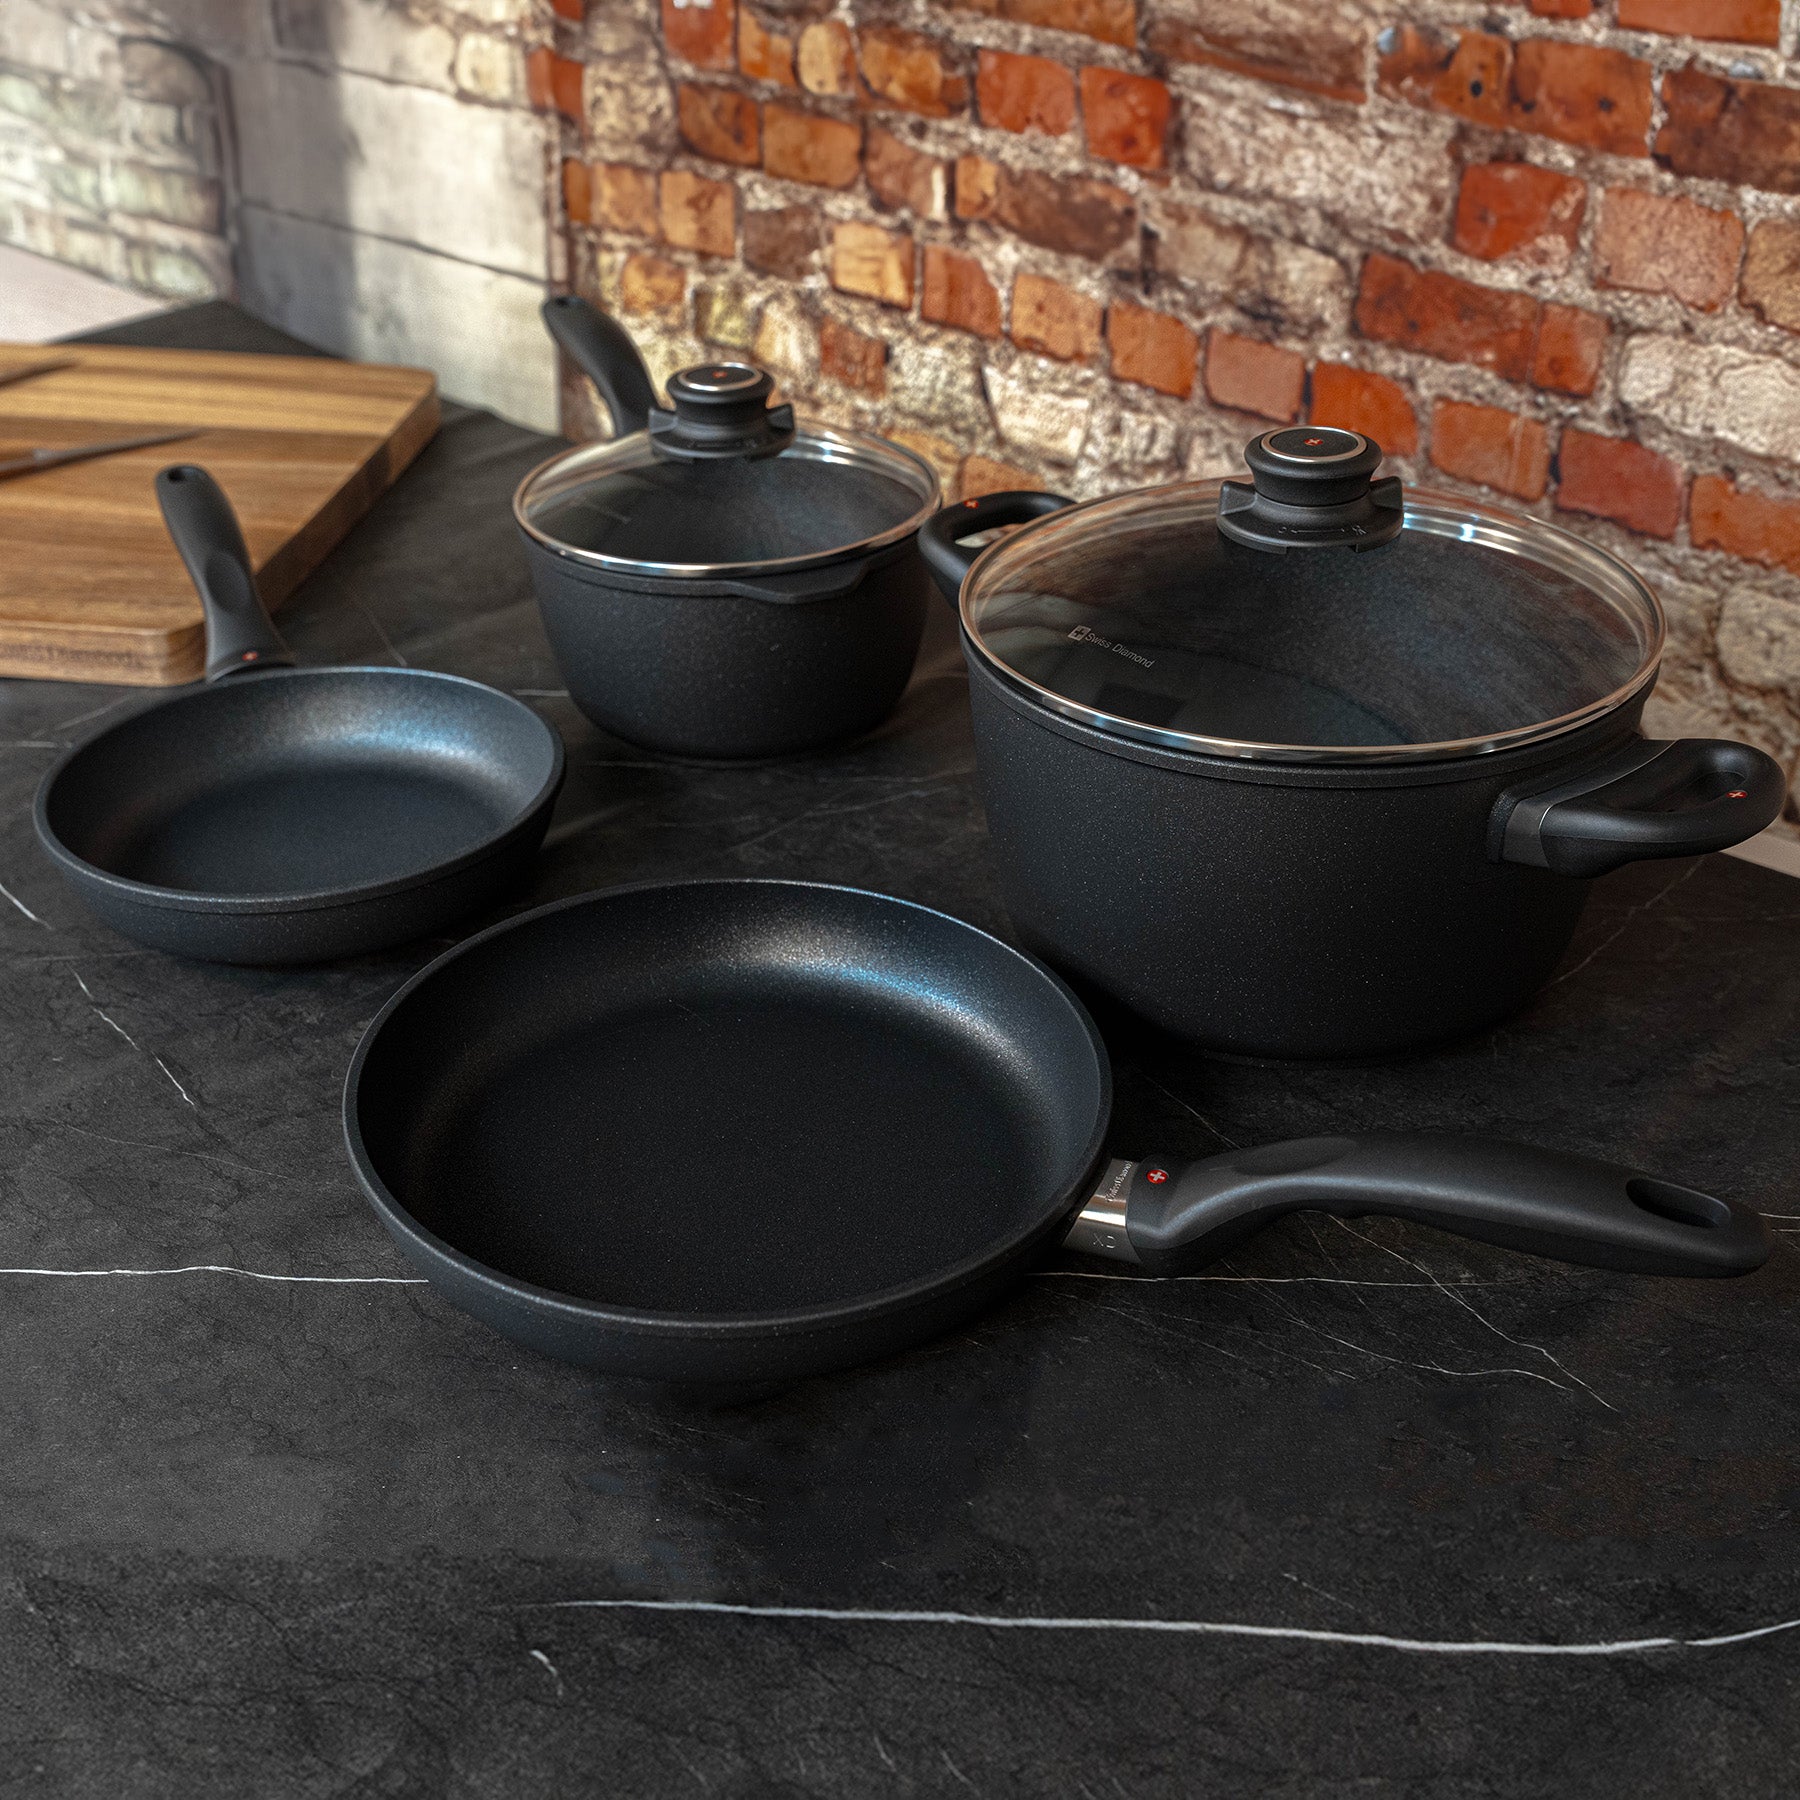 XD Nonstick 6-Piece Set - Newlywed Kitchen Kit angled side view on black marble countertop